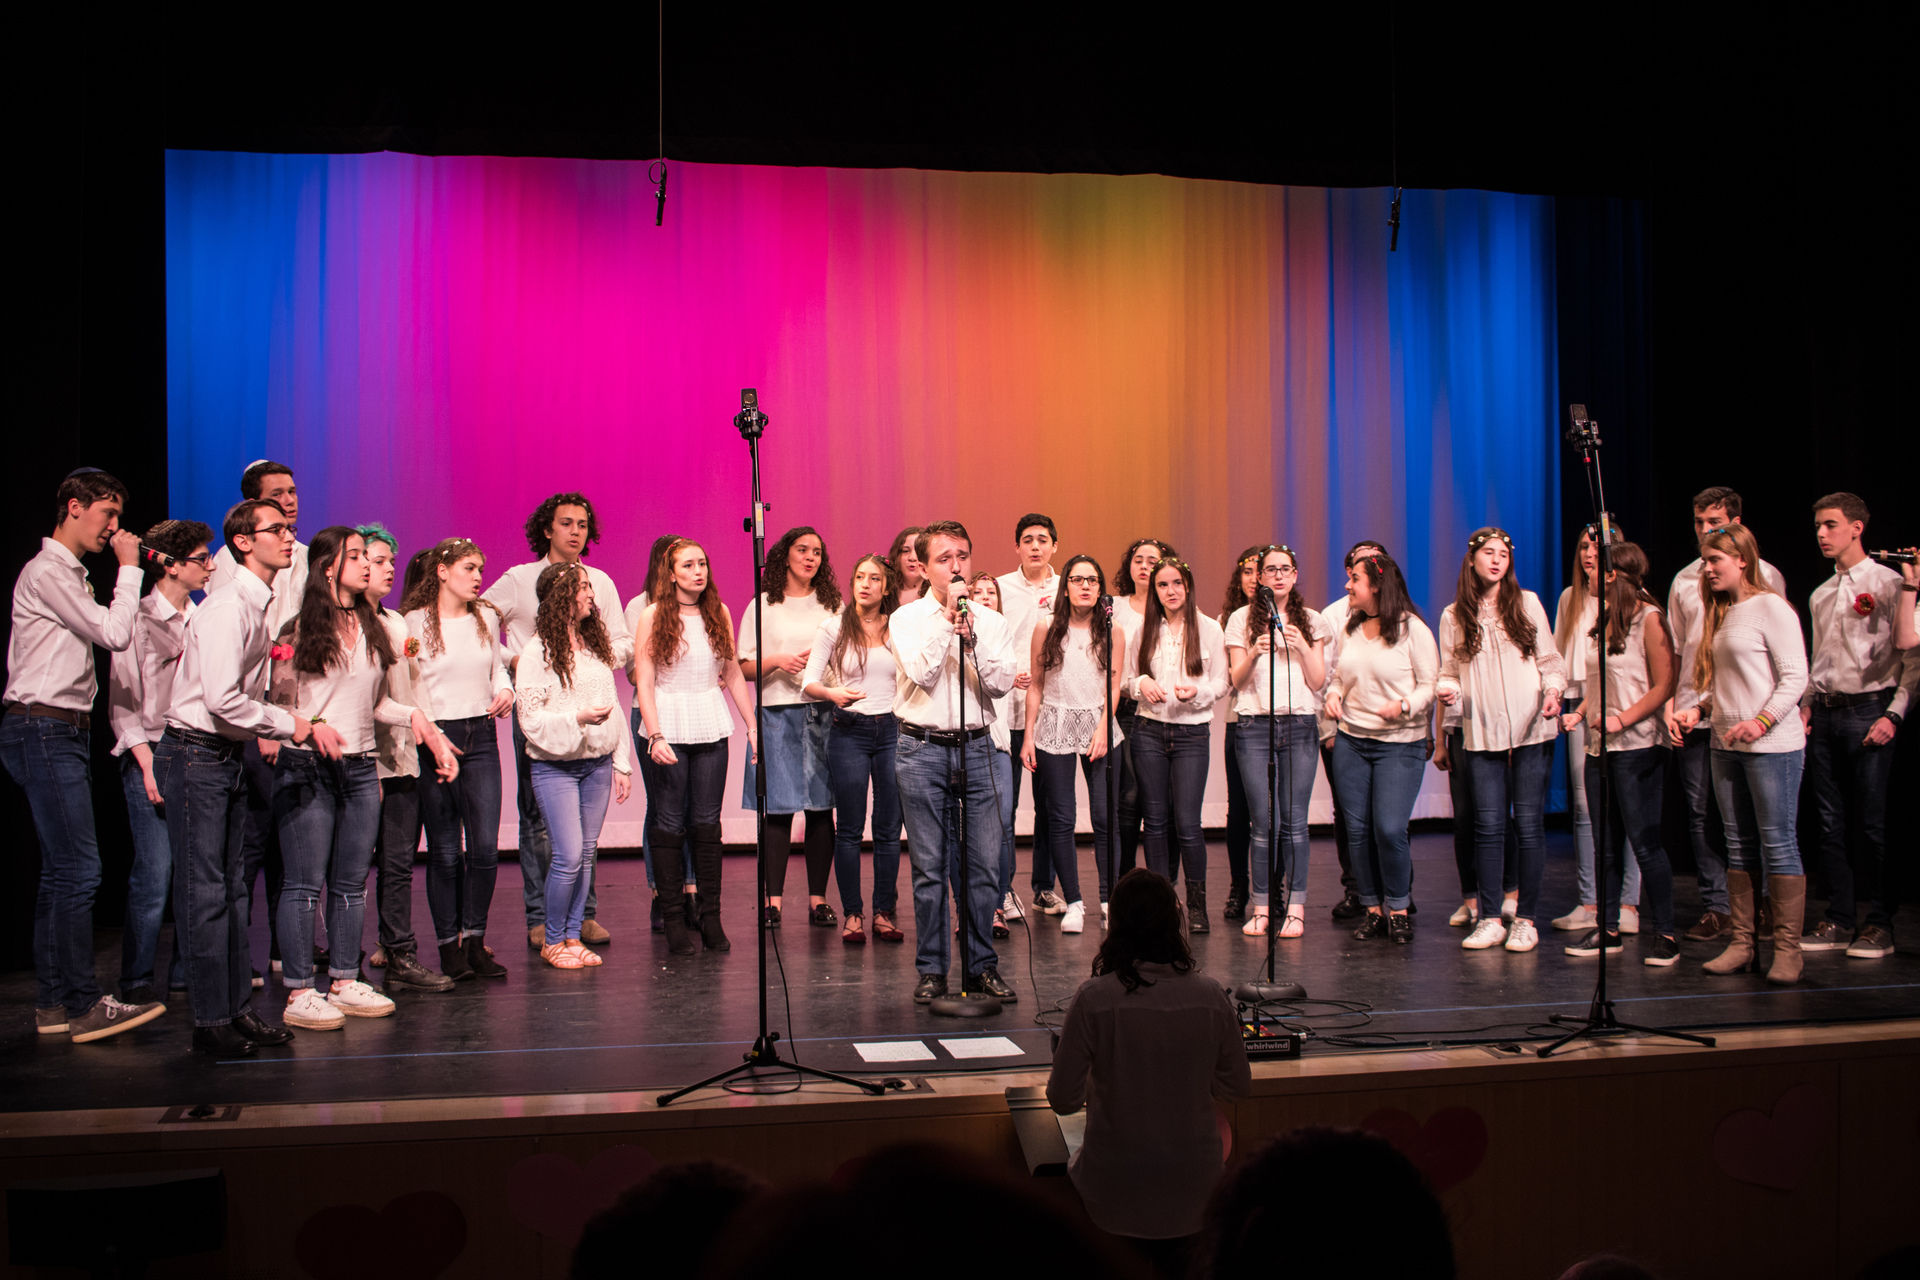 A group of singers on stage in front of a multicolored background.